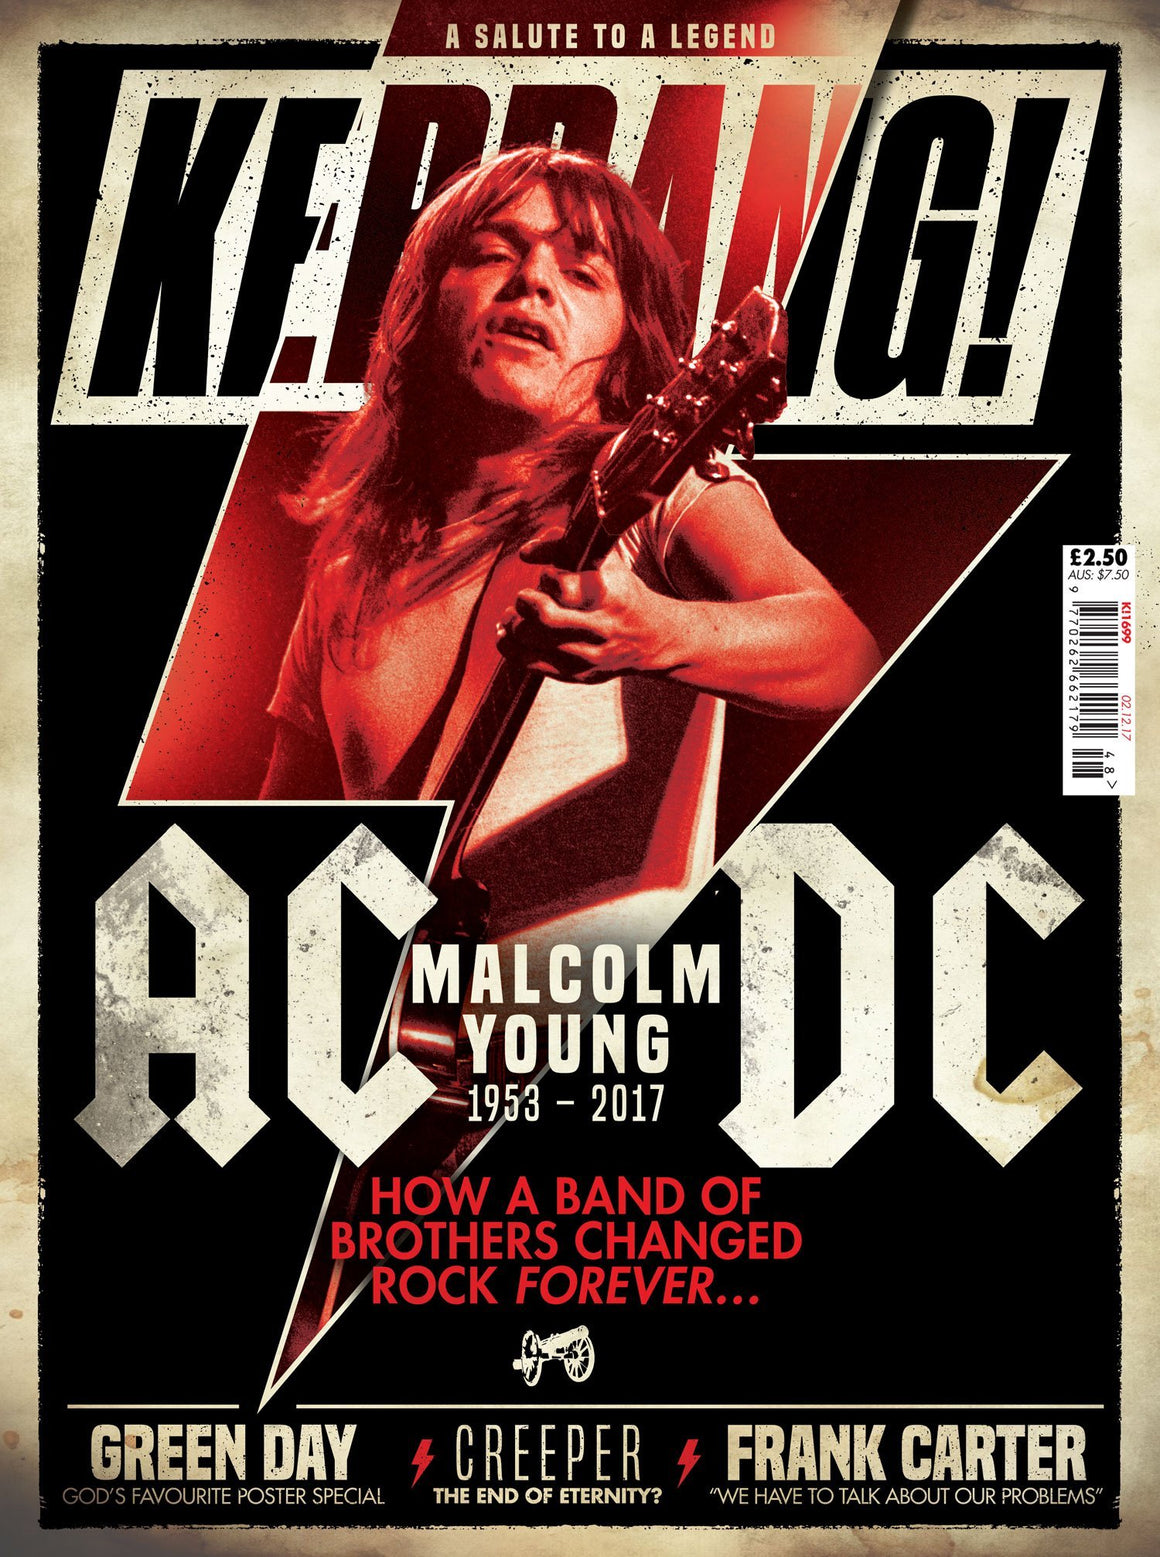 Malcolm Young on the cover of Kerrang! Magazine